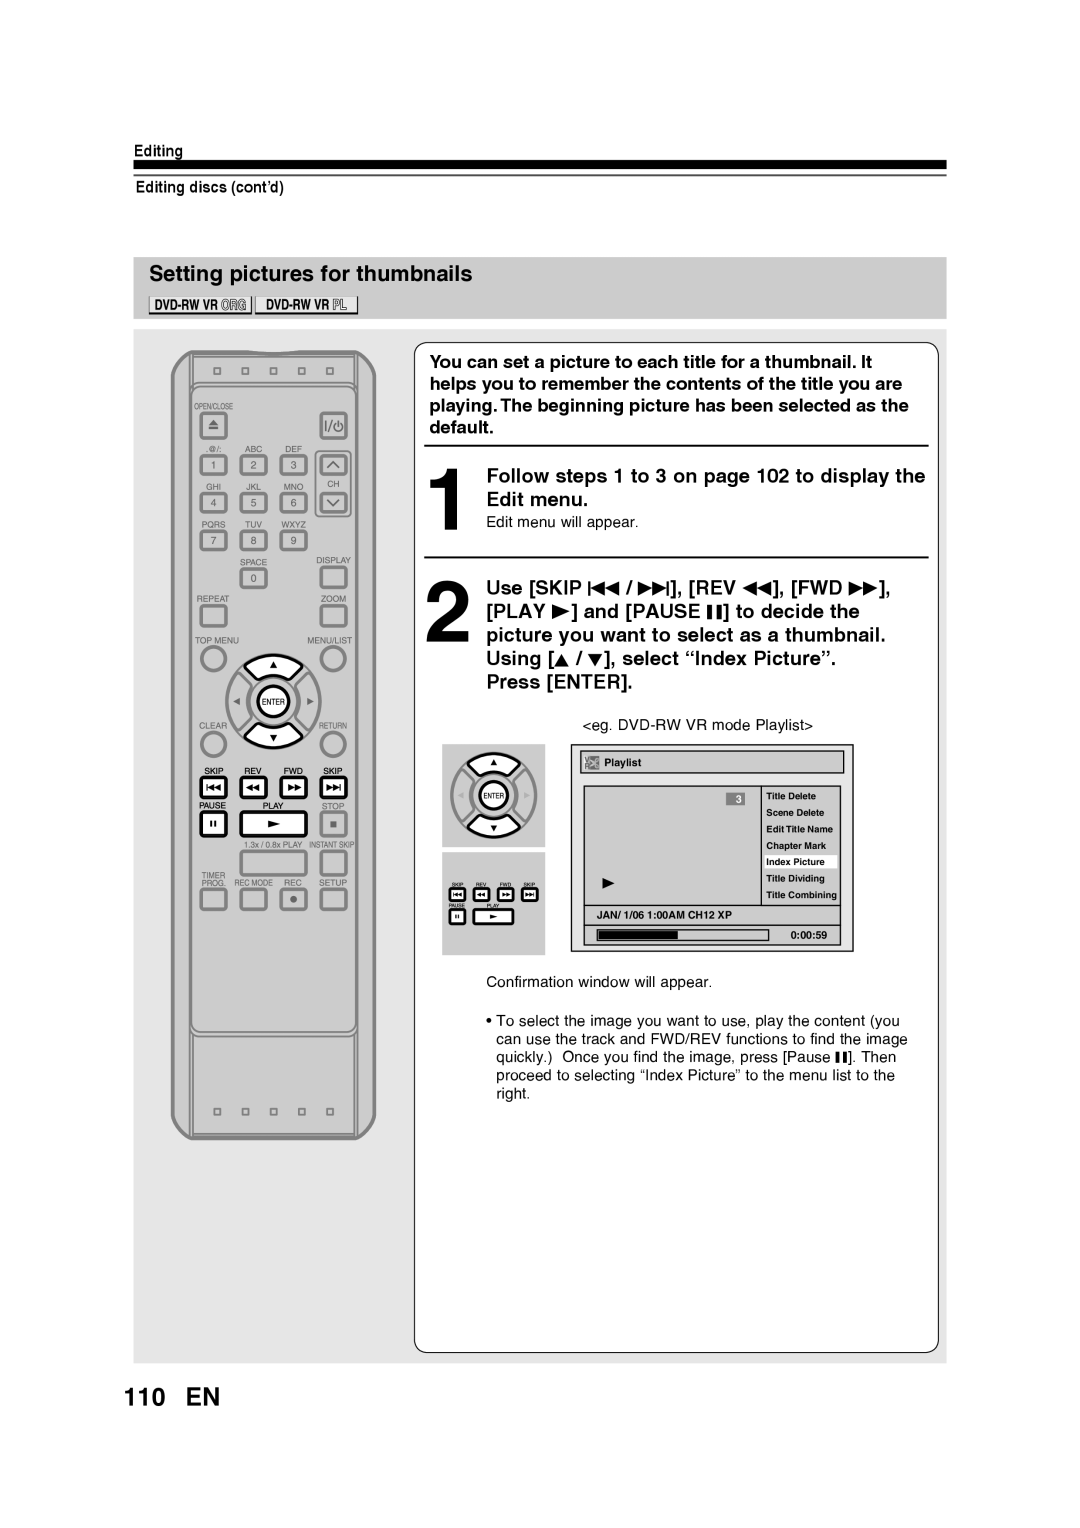 Toshiba D-RW2SU/D-RW2SC 110 EN, Setting pictures for thumbnails, Follow steps 1 to 3 on page 102 to display the Edit menu 